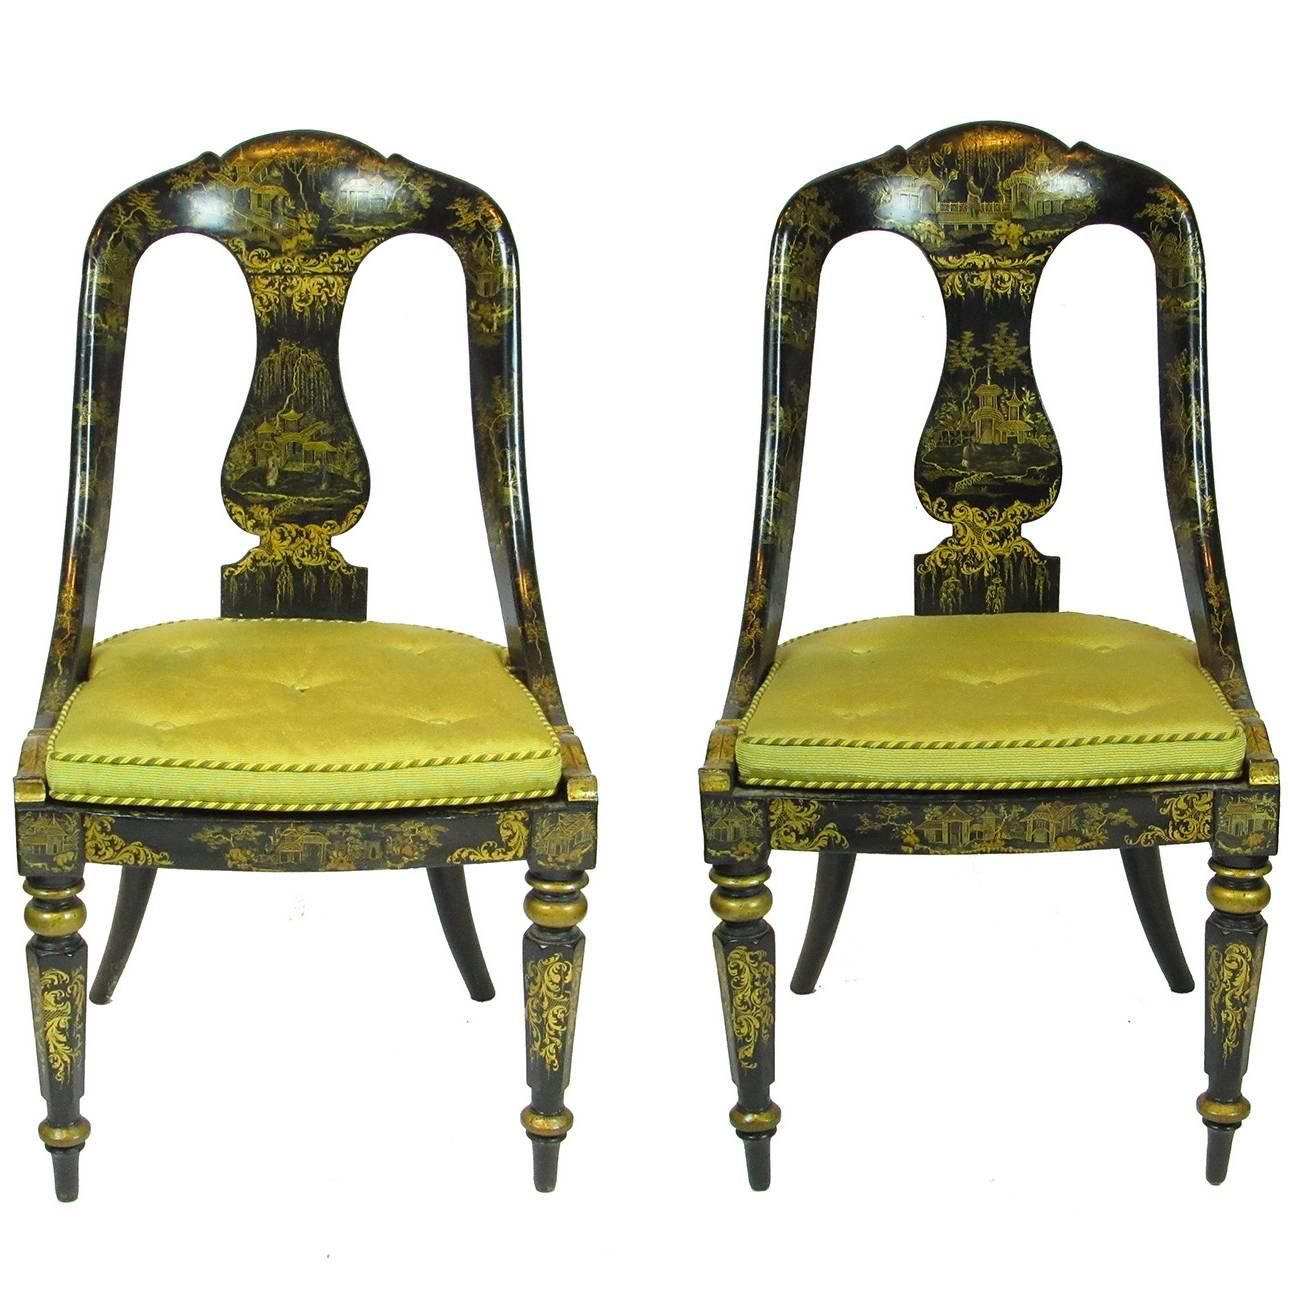 Pair of Regency Japanned and Gilt Decorated Cane Seat Chairs